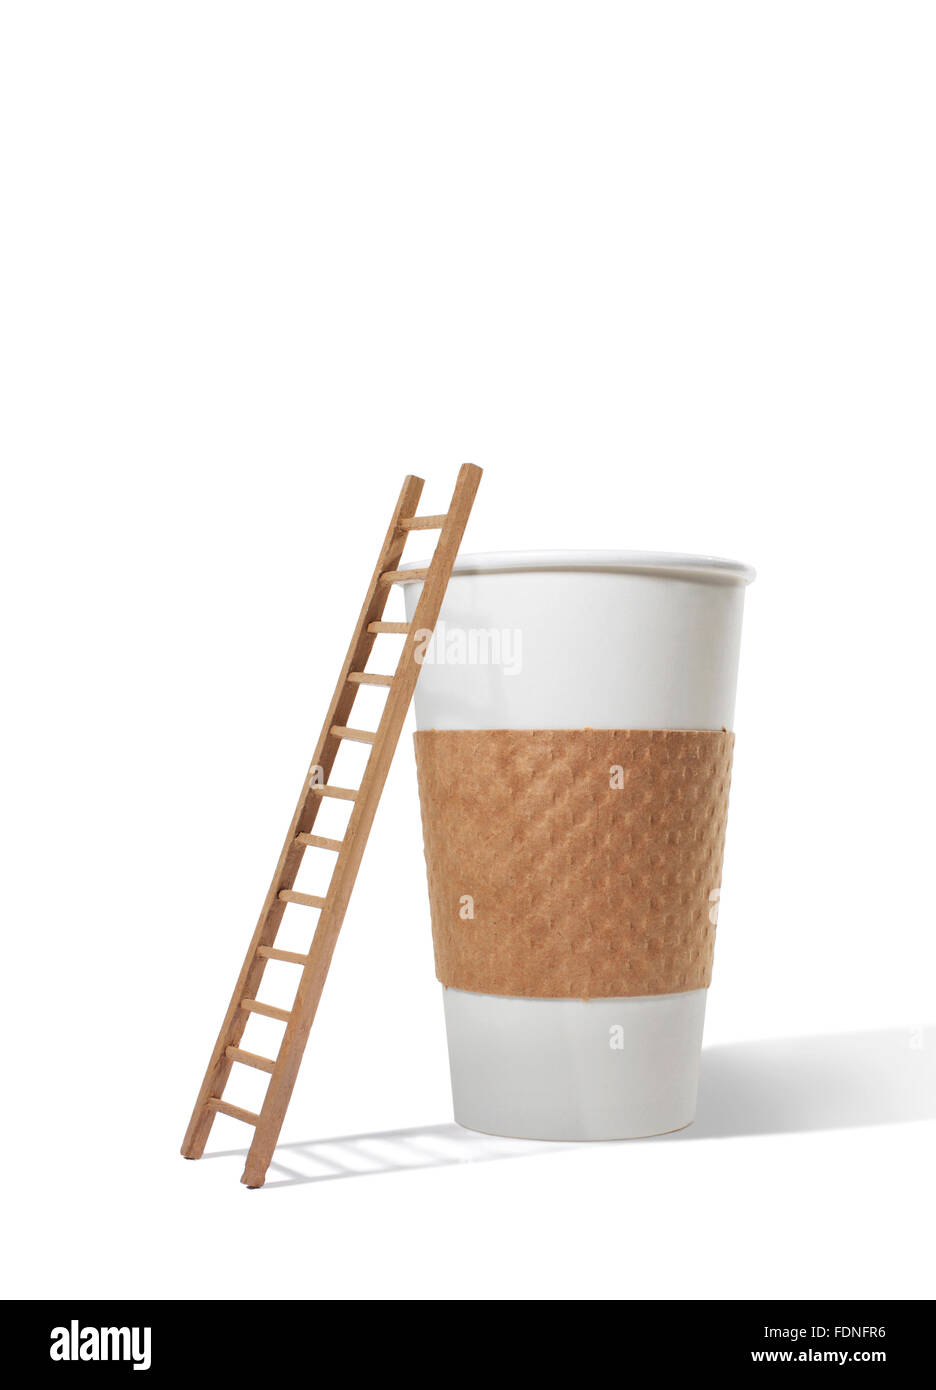 Studio shot of a ladder next to large coffee cup Stock Photo